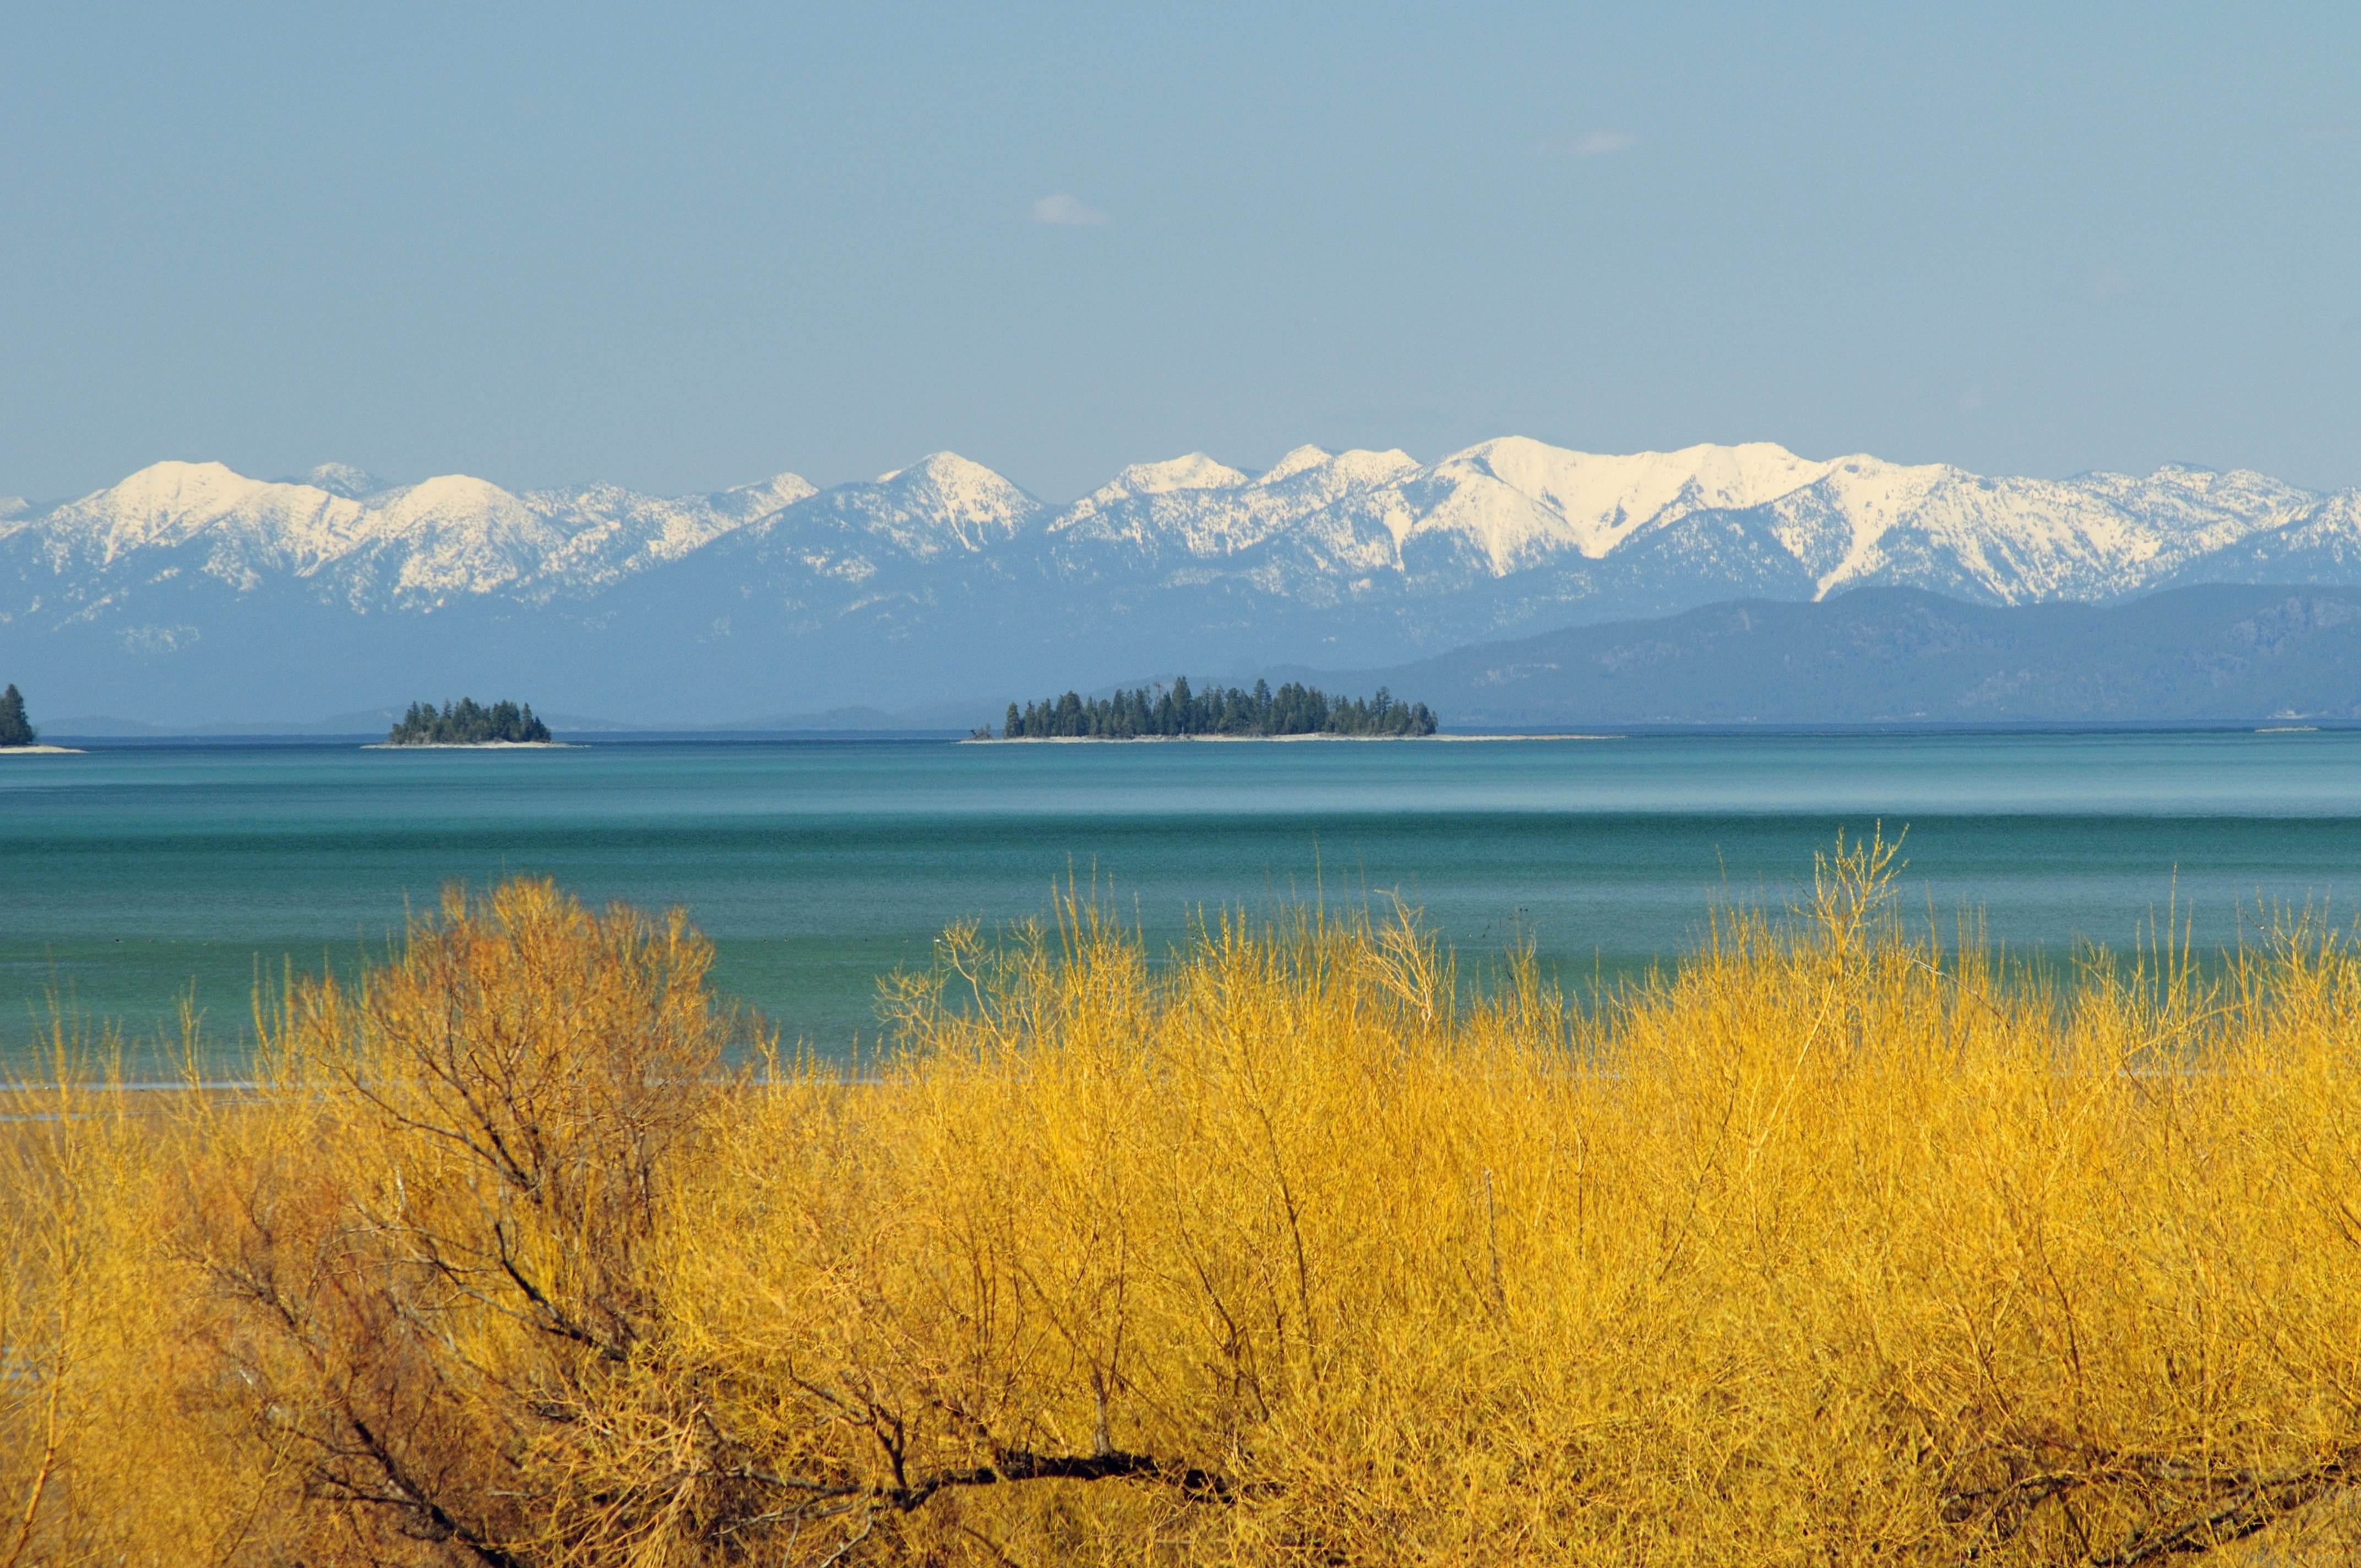 Spring comes to Flathead Lake while the Swan Range is still cloaked in winter.